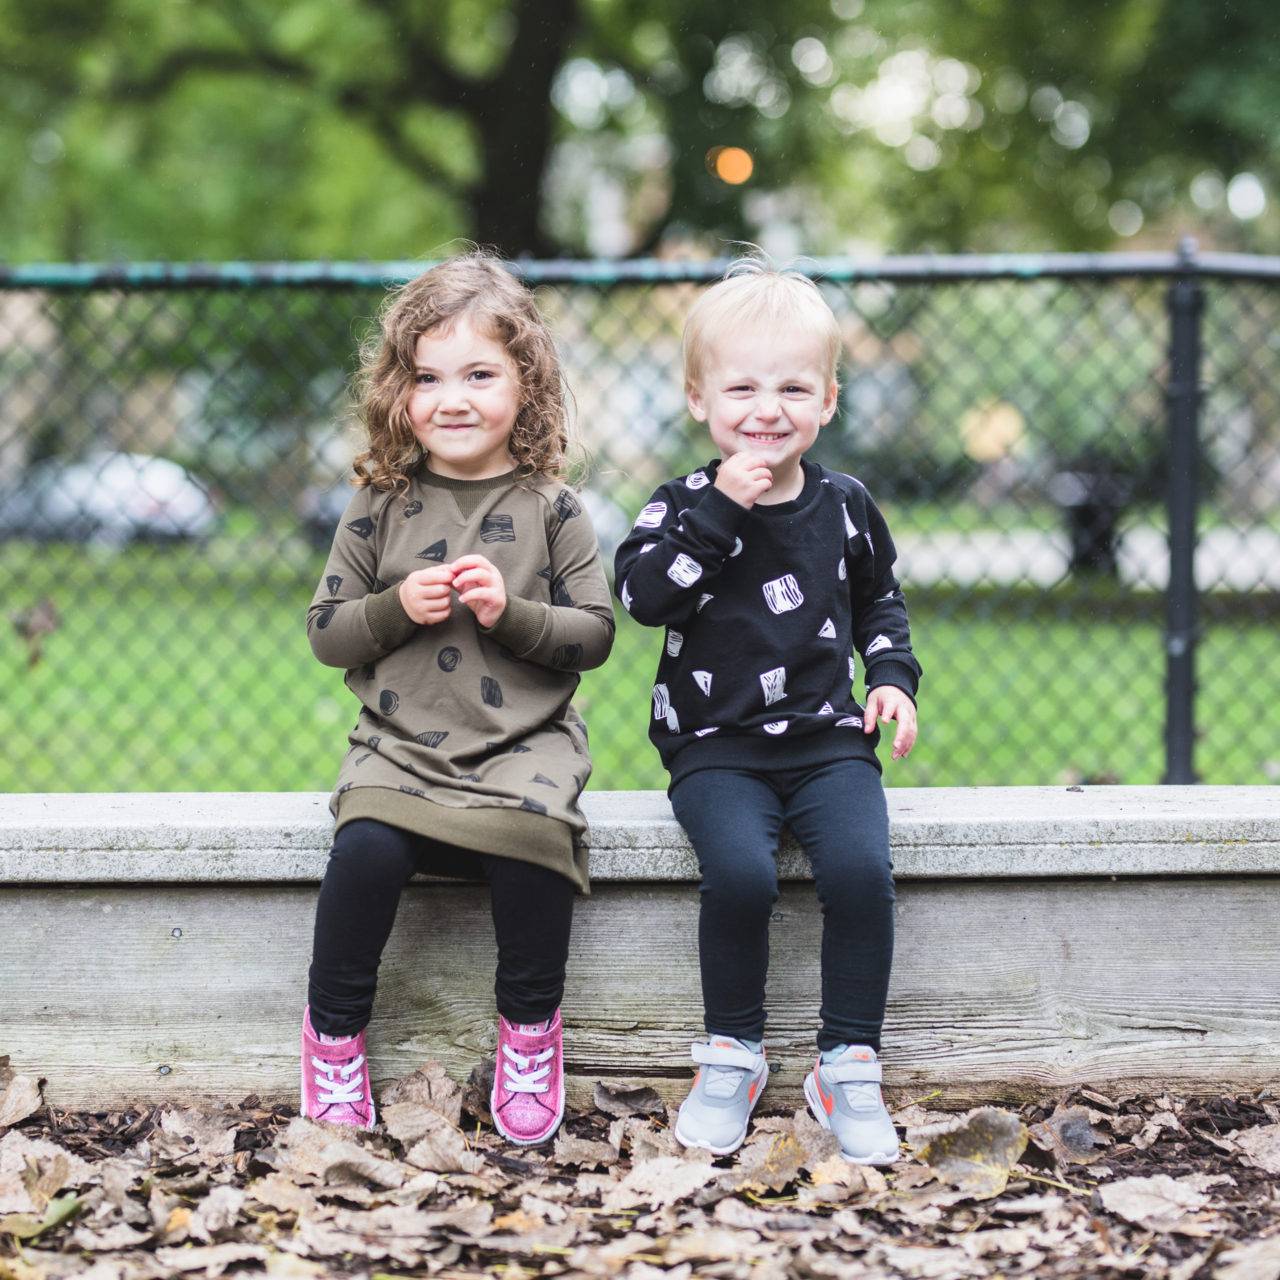 Family-Friendly Fall Activities in the Chicago and New York Areas